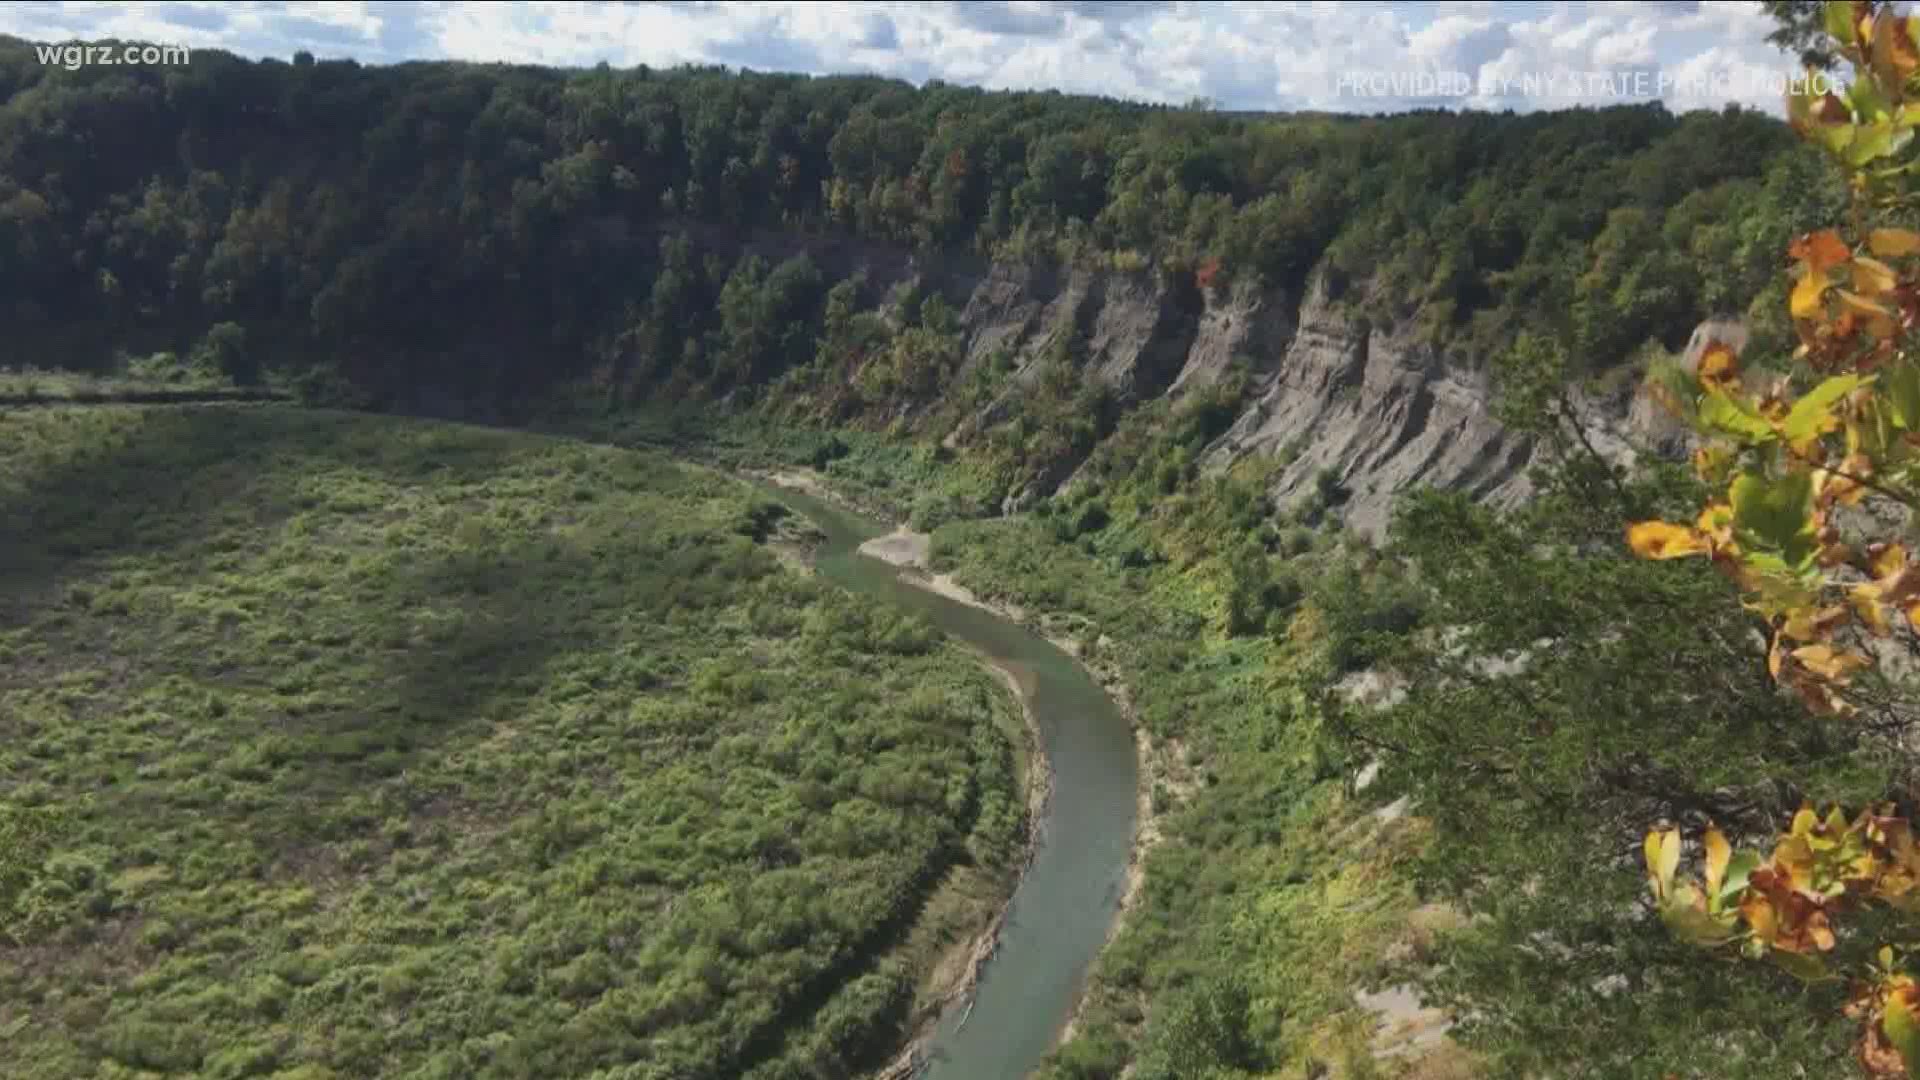 New sites to see at Letchworth State Park